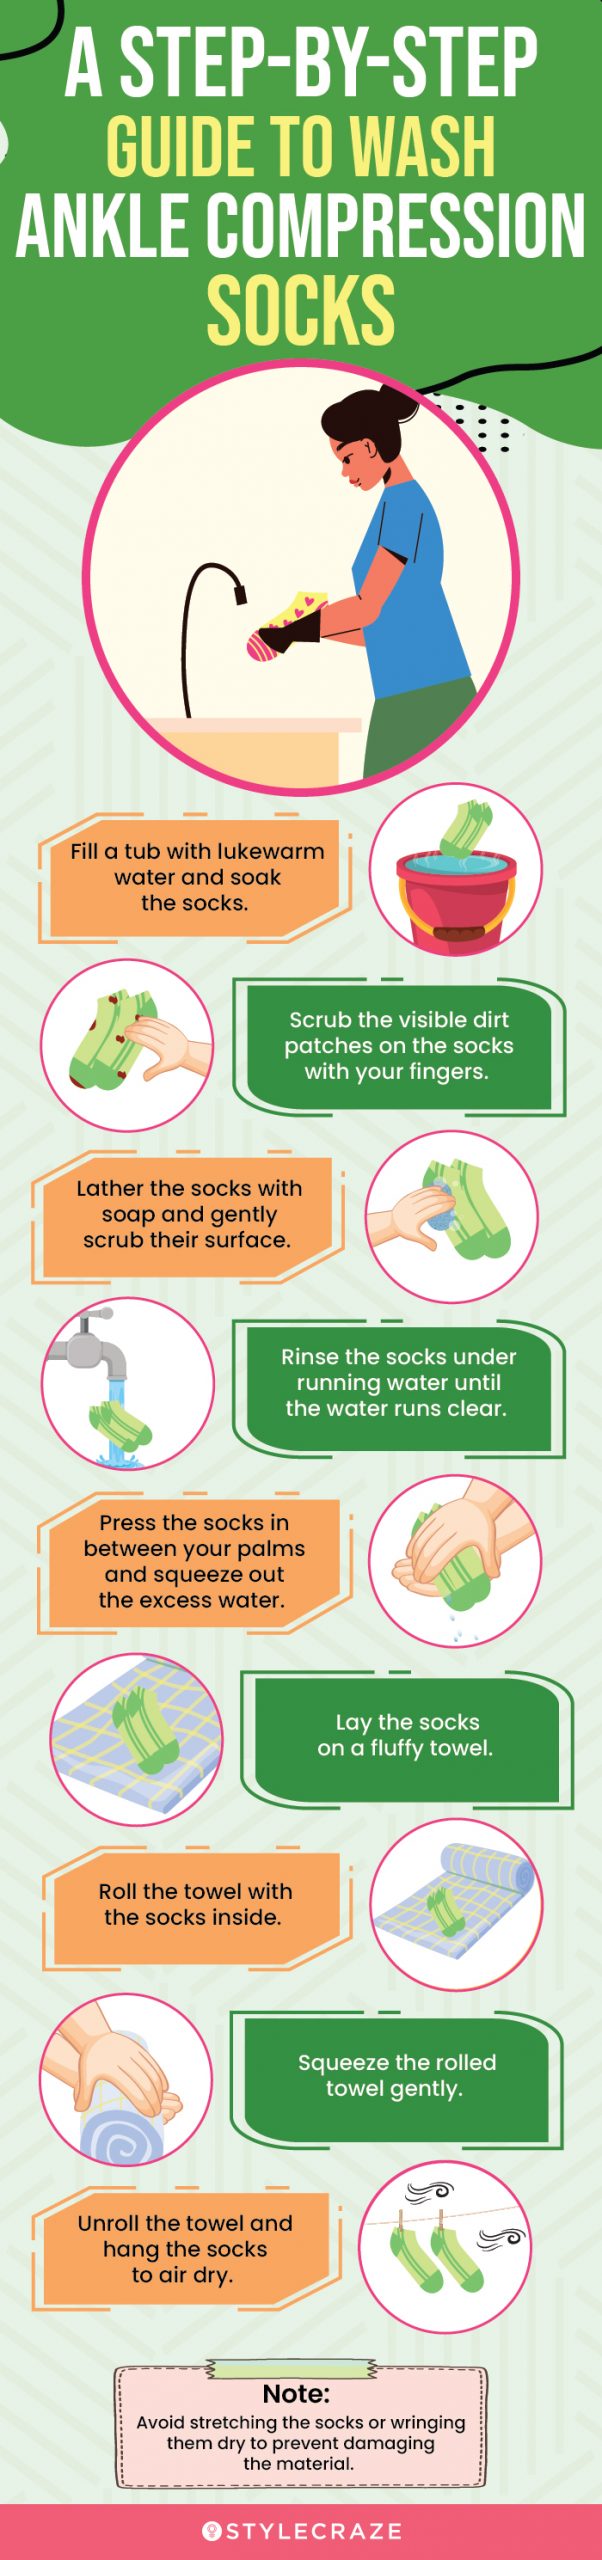 A Step-By-Step Guide To Wash Ankle Compression Socks (infographic)